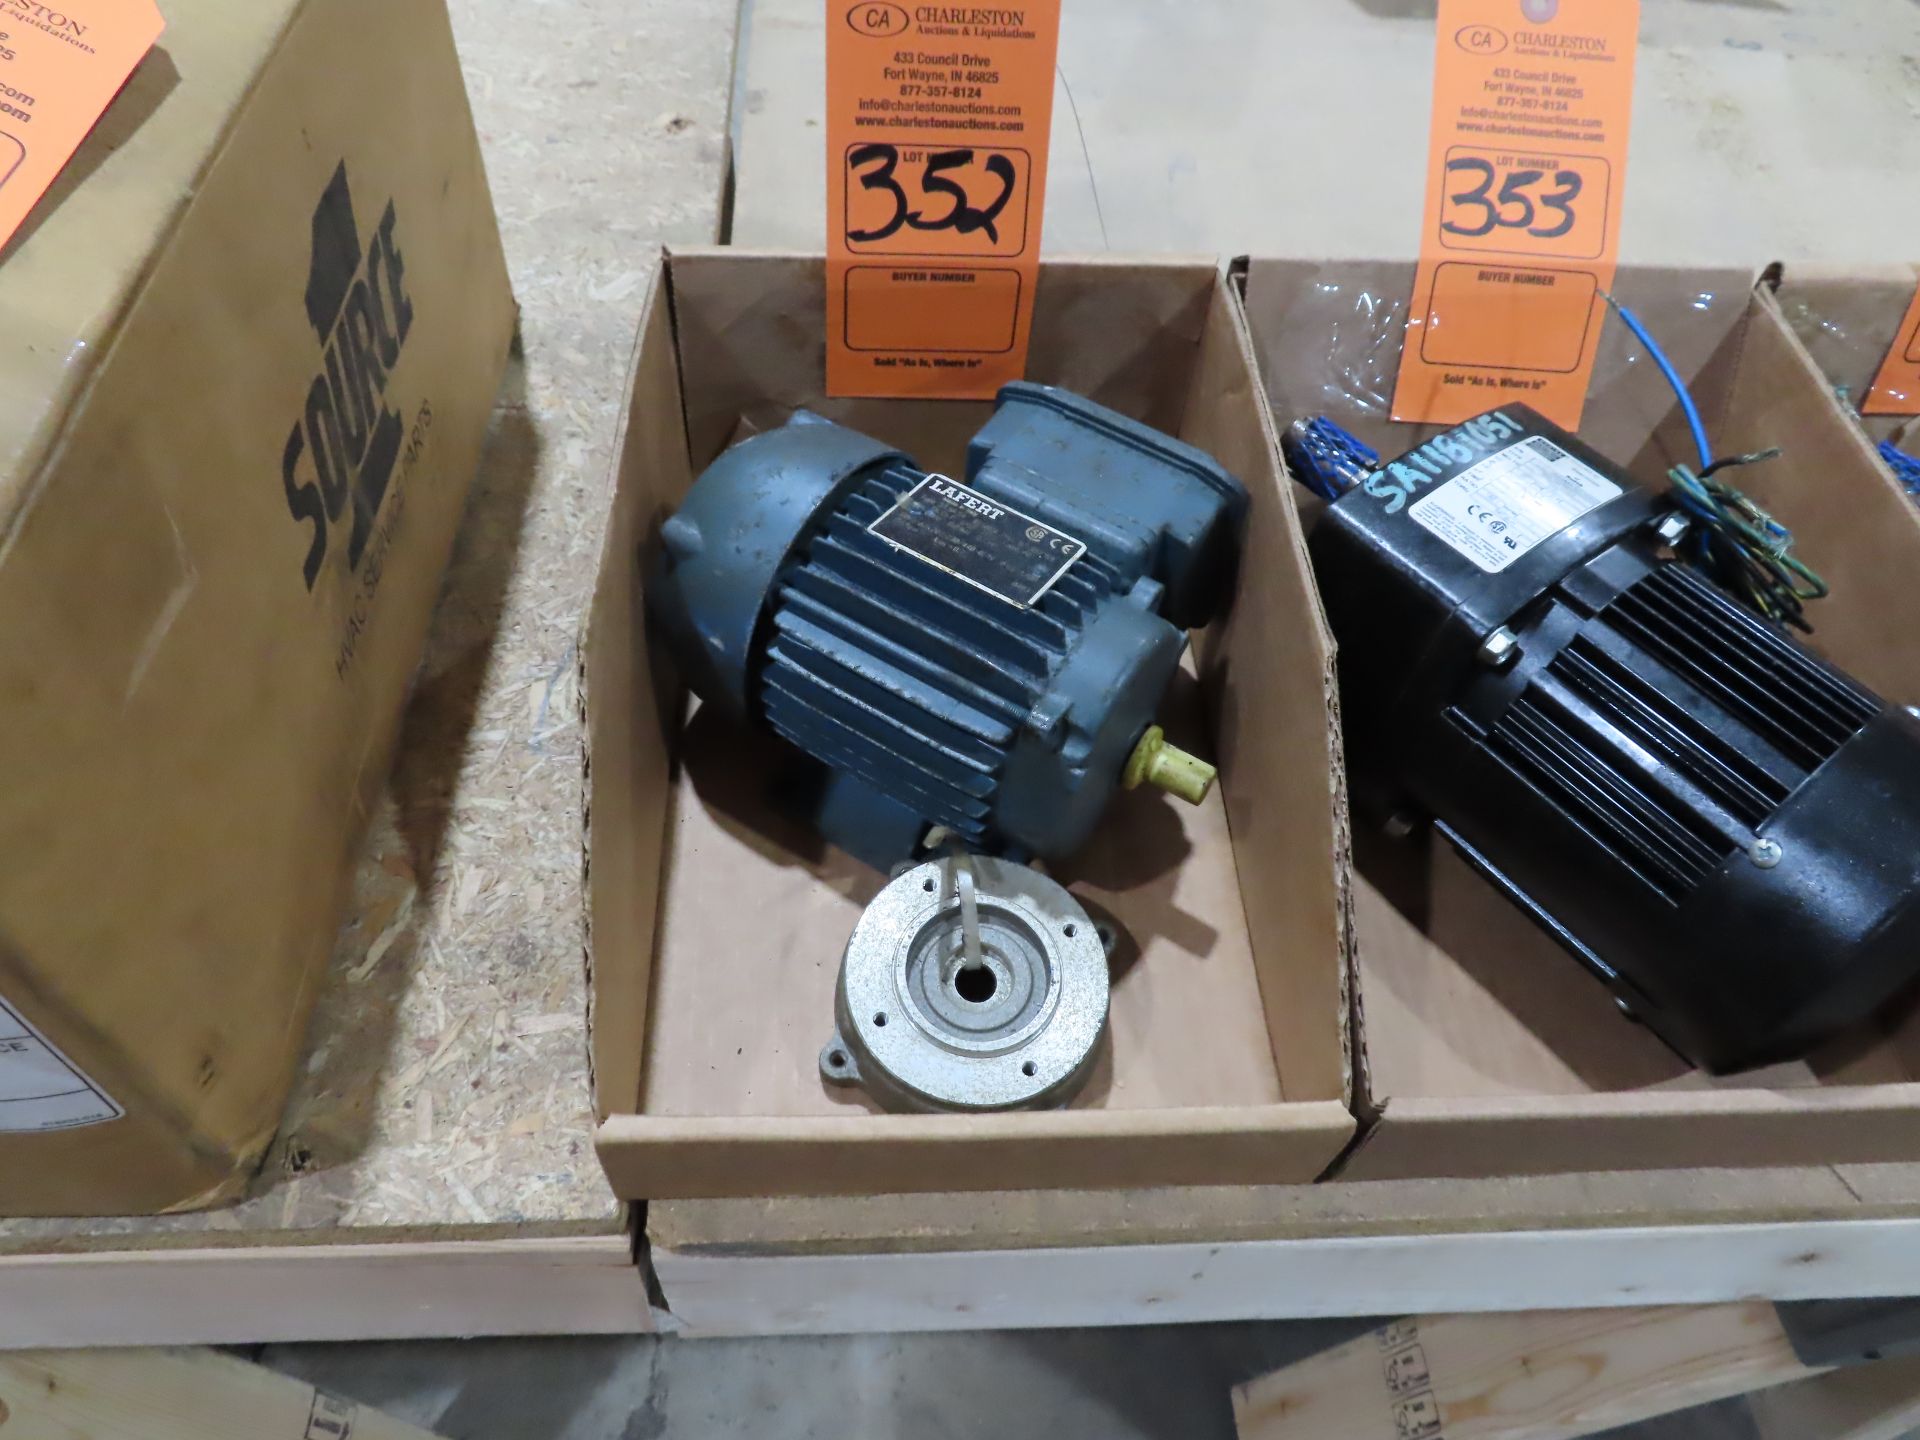 Lafert motor model ST56S4, used parts crib spare, as always with Brolyn LLC auctions, all lots can